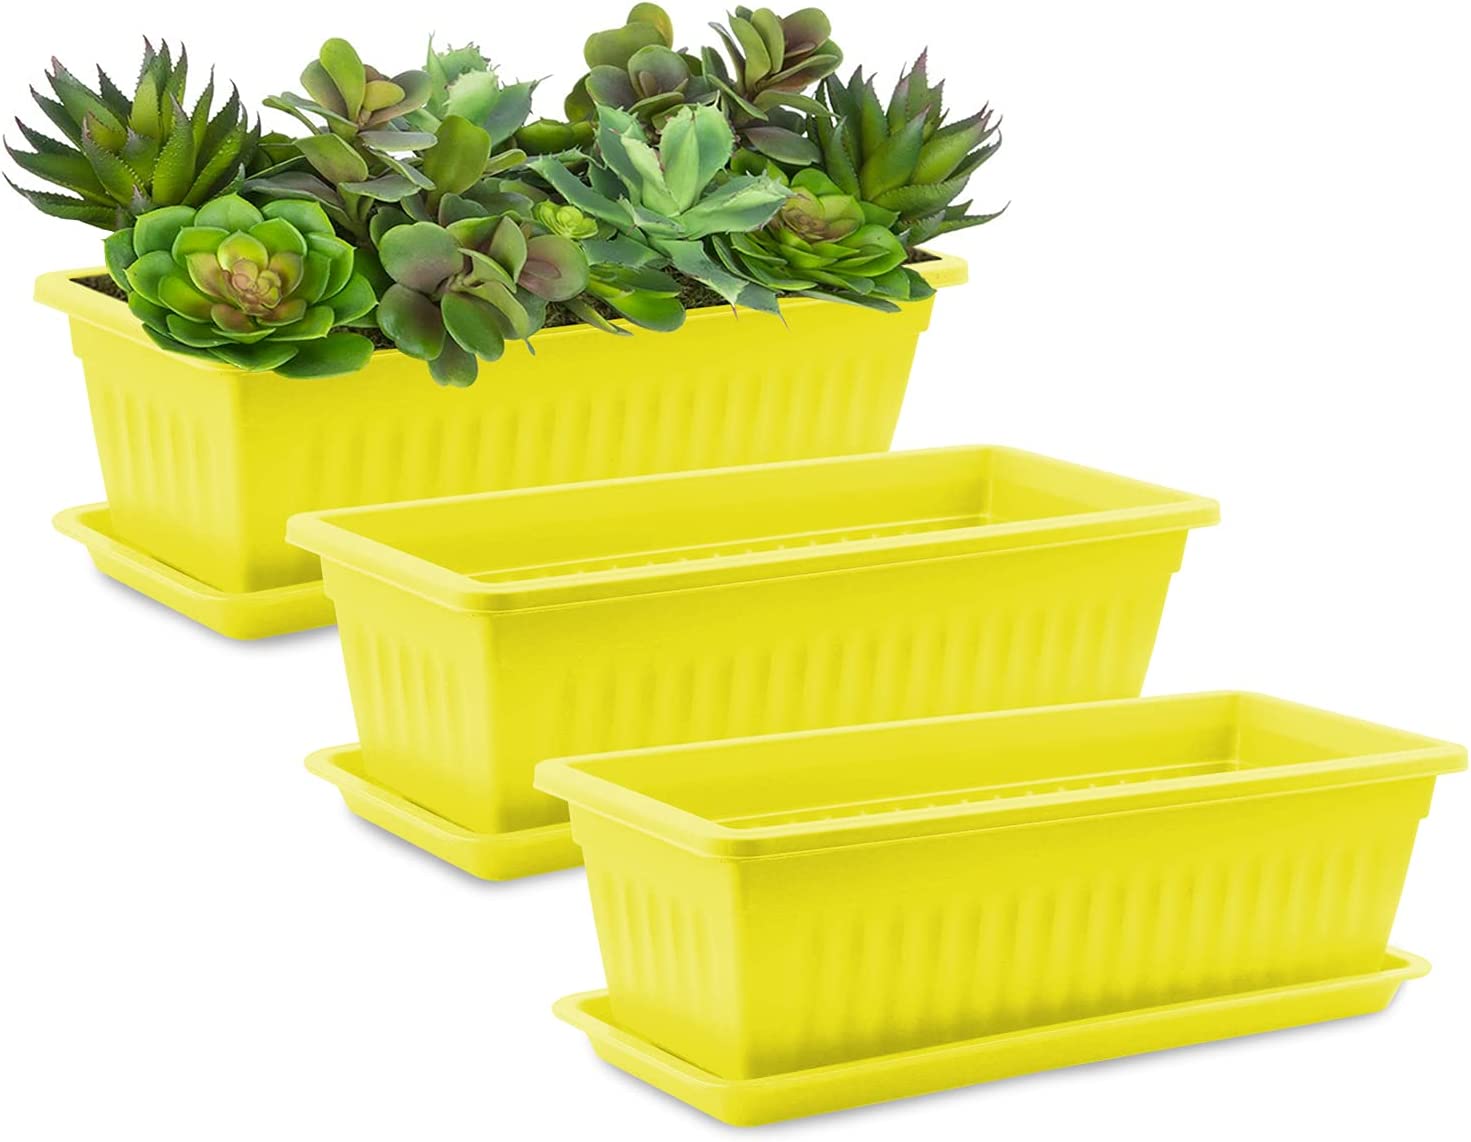 17 Inch Rectangular Plastic Thicken Planters with Trays - Window Planter Box for Outdoor and Indoor Herbs, Vegetables, Flowers and Succulent Plants (1 Pack Yellow) - image 2 of 8